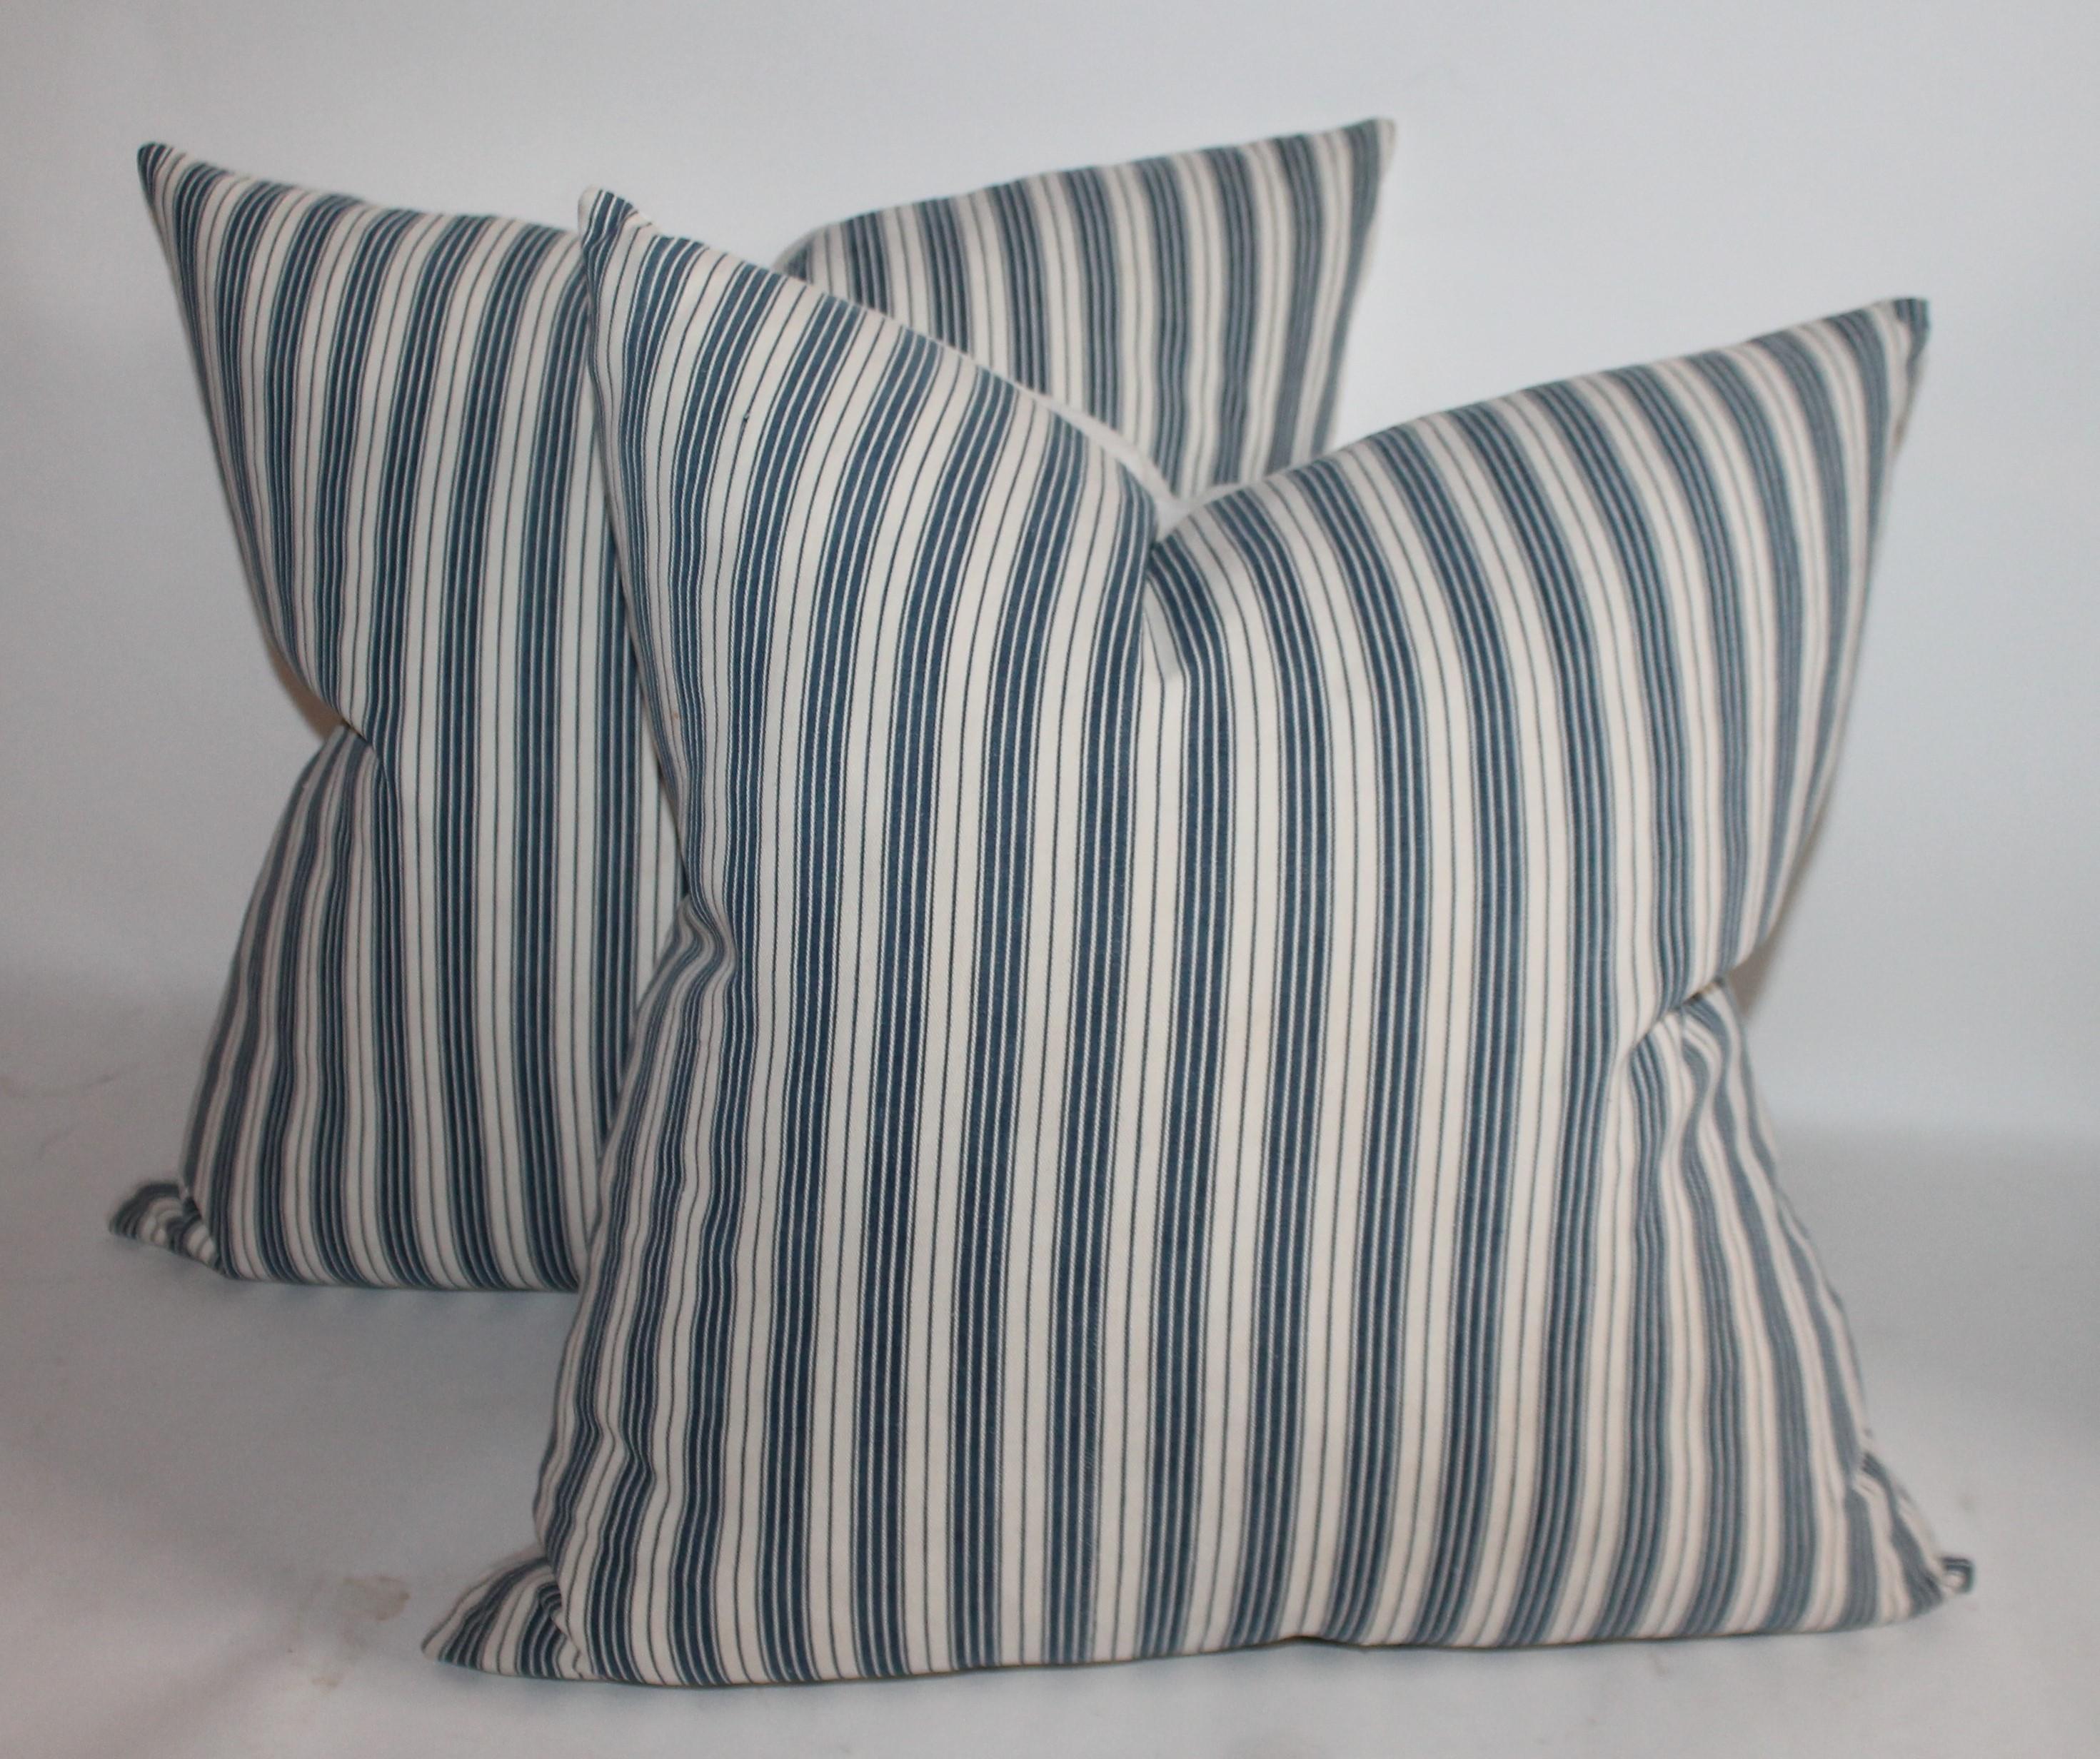 19th century Ticking Pillows with white cotton linen backs. There are one pair of 20 x 20 and one 22 x 22.
2 - 20 x 20
1 - 22 x 22.